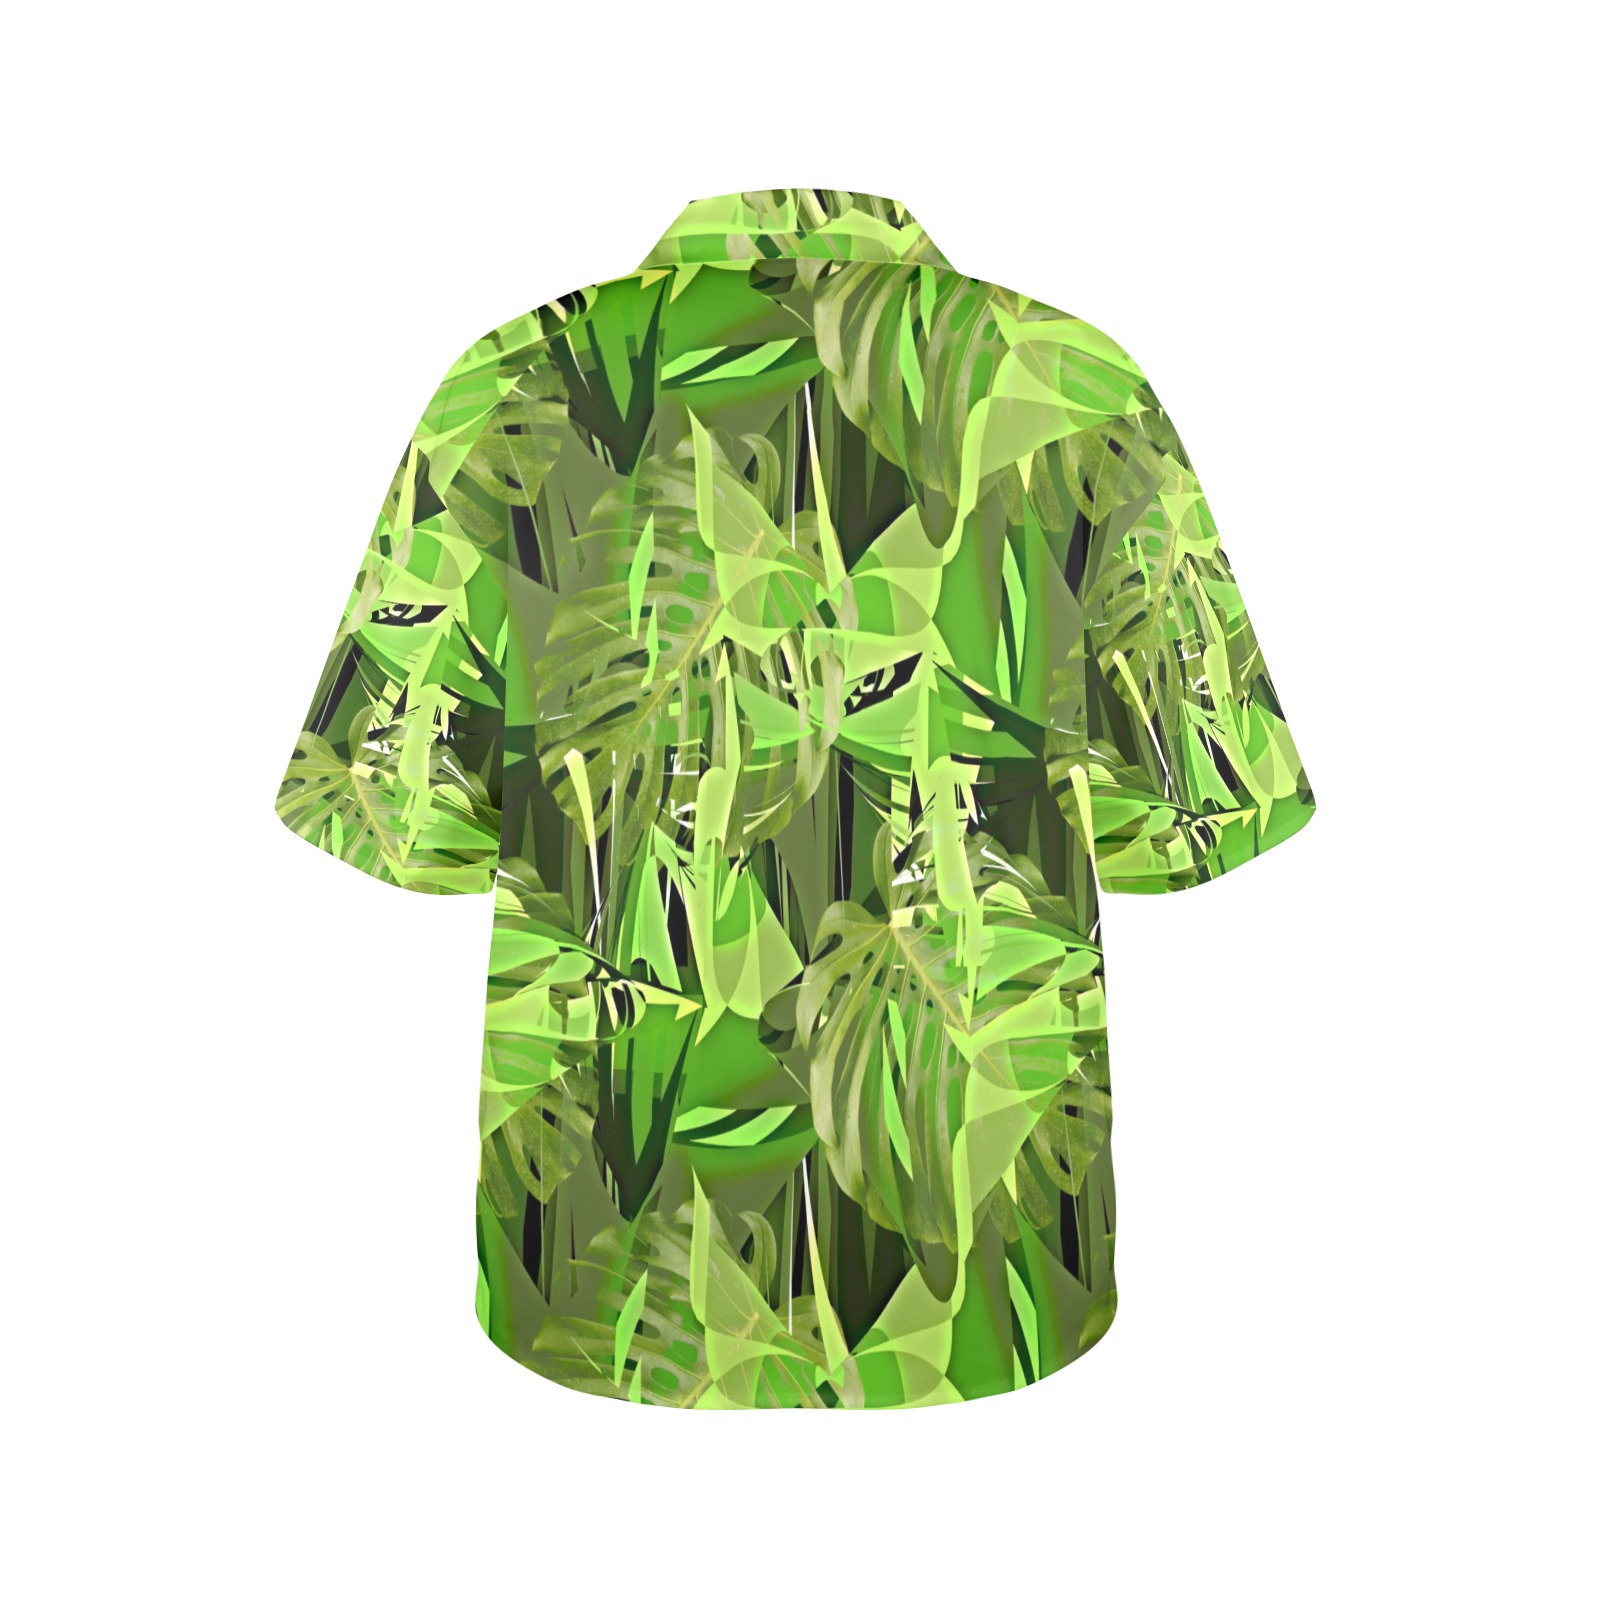 Tropical Jungle Leaves Camouflage Women's All Over Print Hawaiian Shirt (T58-2)